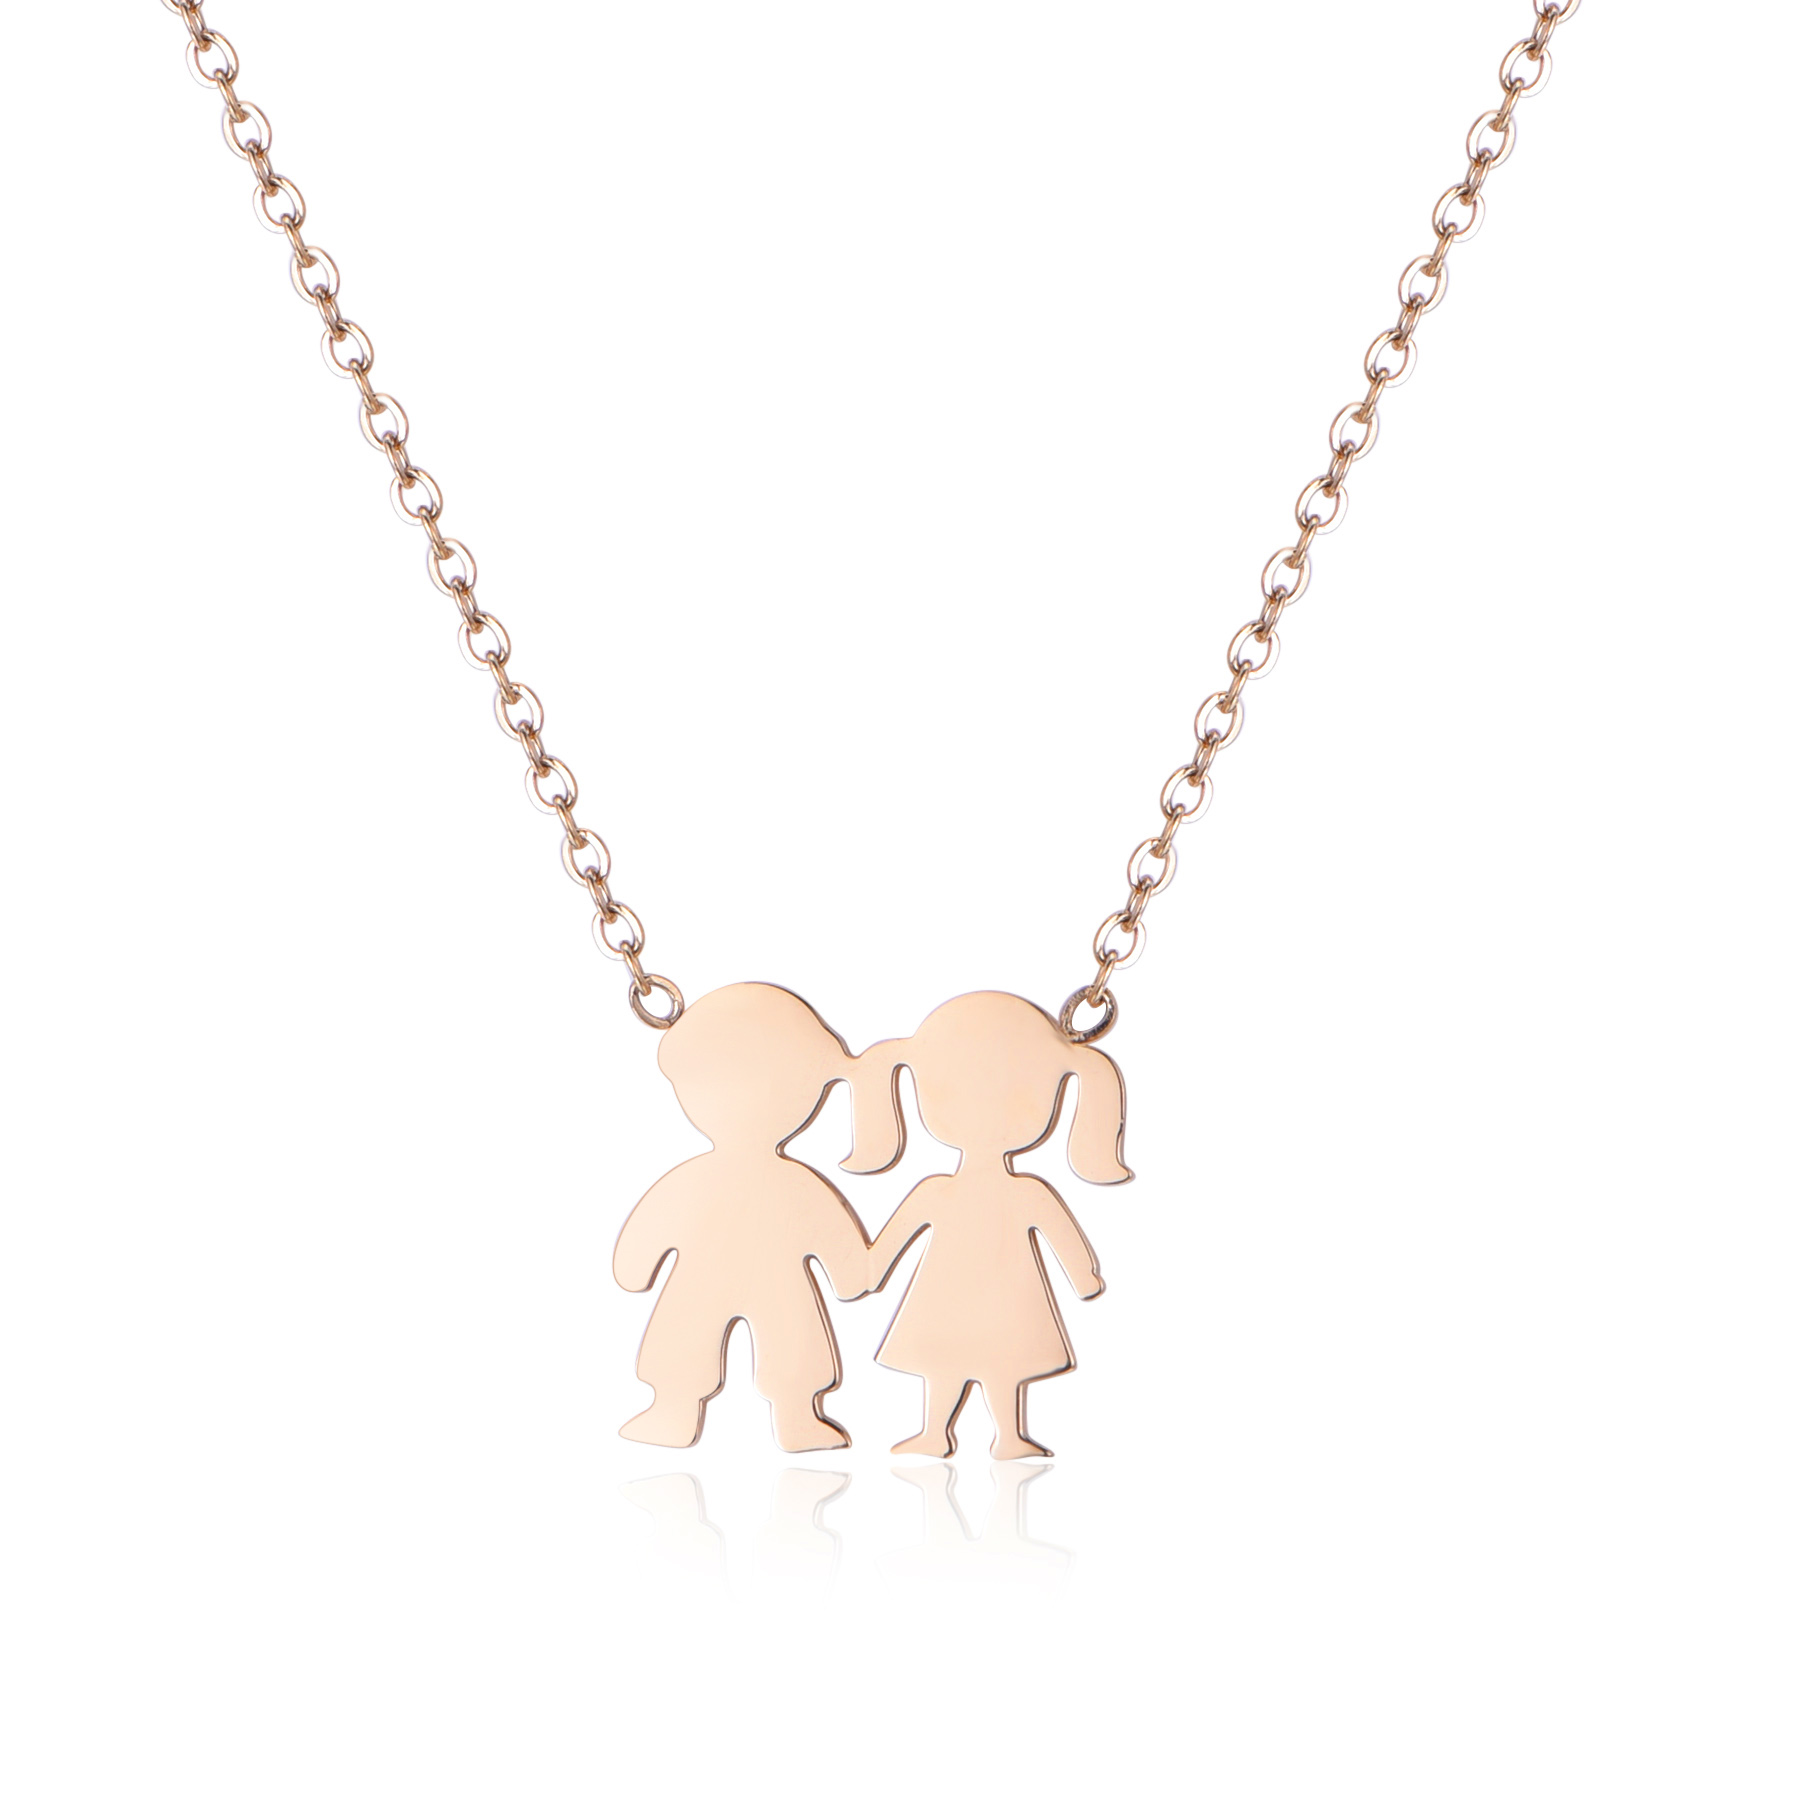 Personalized Stainless Steel Gold Children Charms Necklace NB3-39